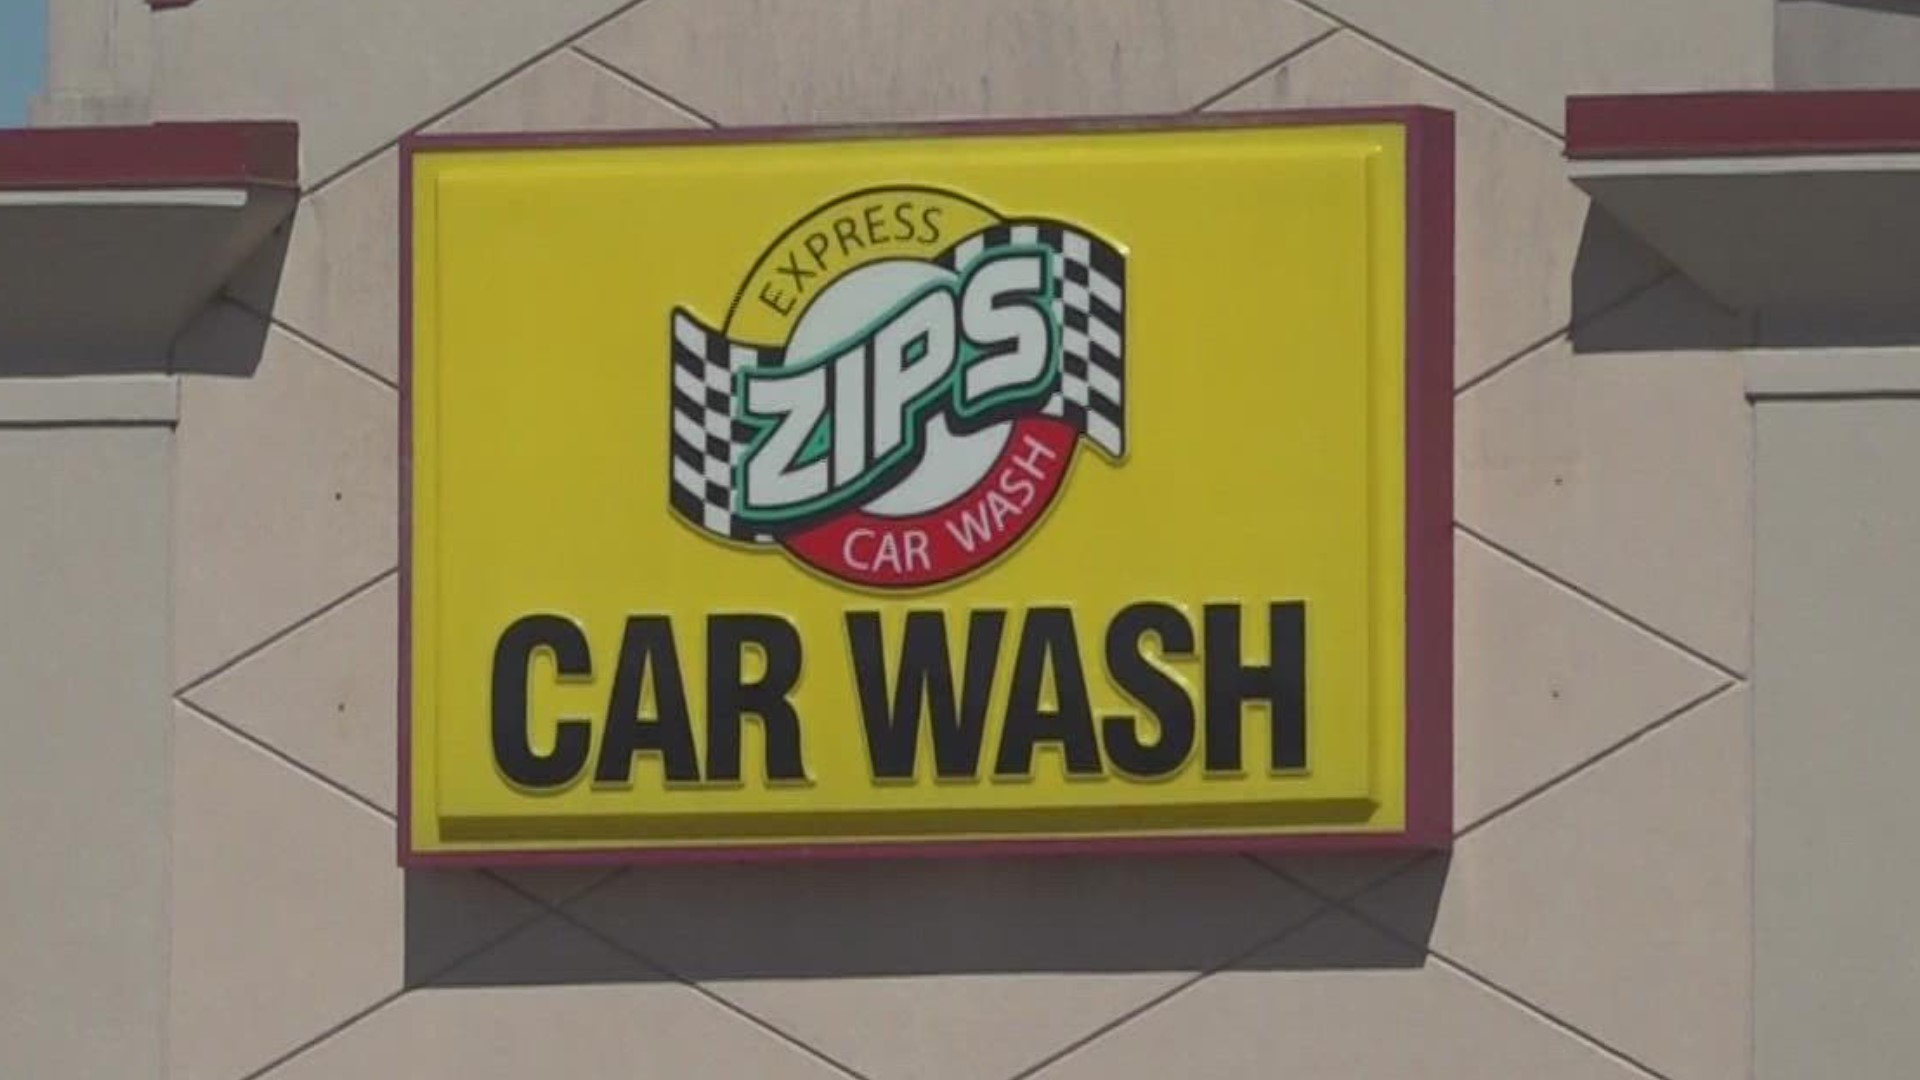 Concerns are now being raised after Zips Car Wash in Rogers malfunctioned and trapped teenagers in their car.